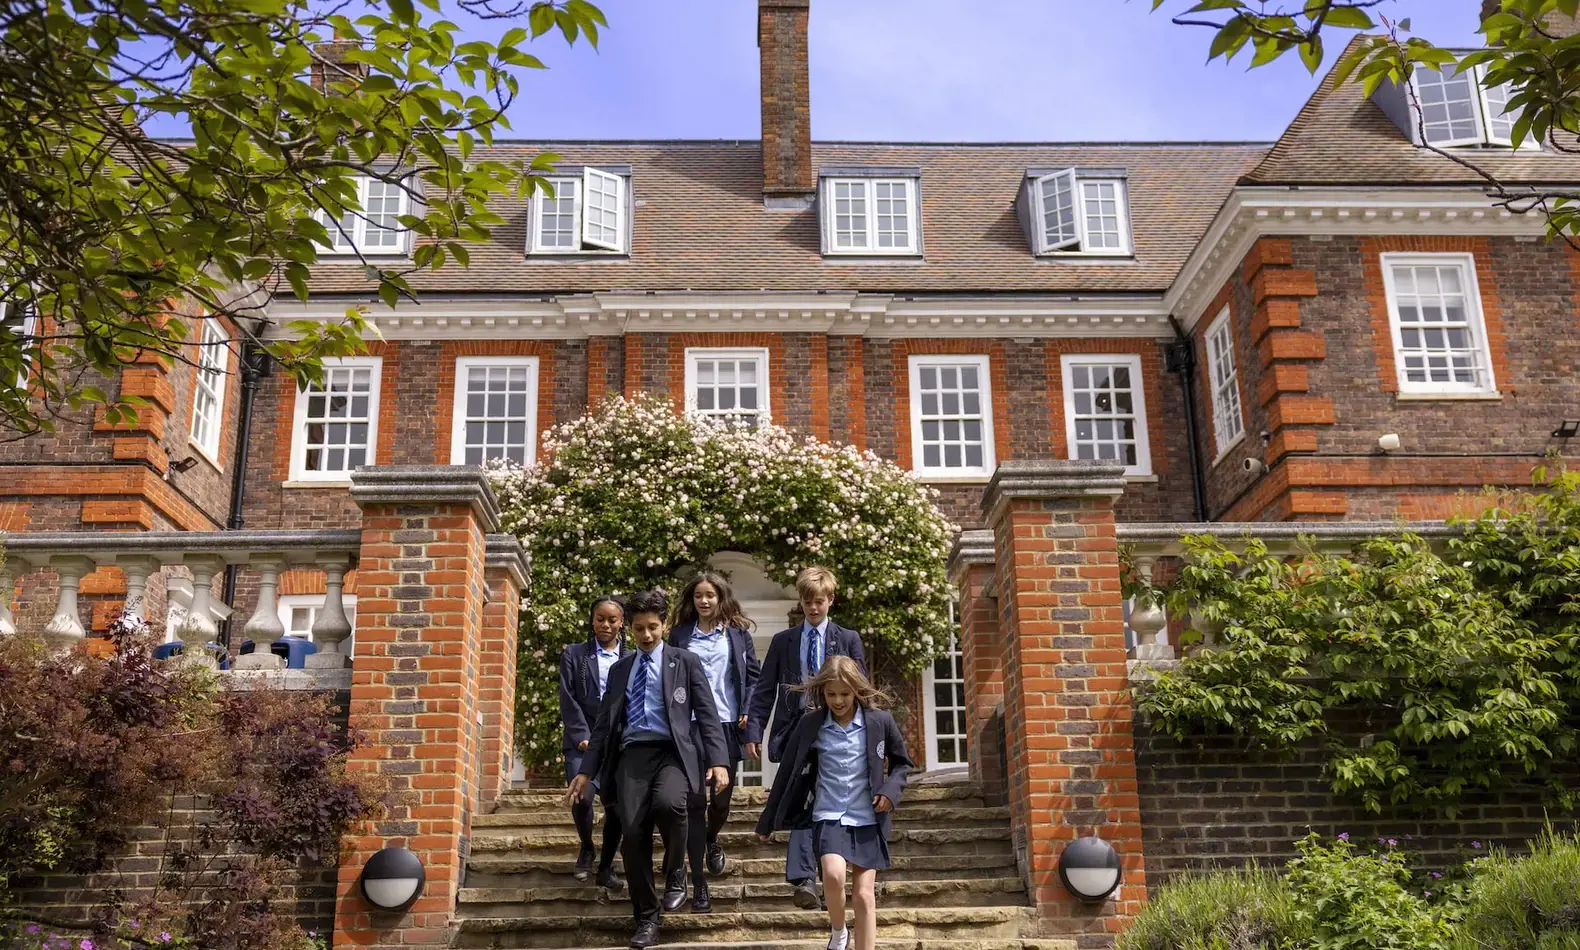 Senior pupils running the stairs in the campus of Ibstock Place School, a private school near Richmond.